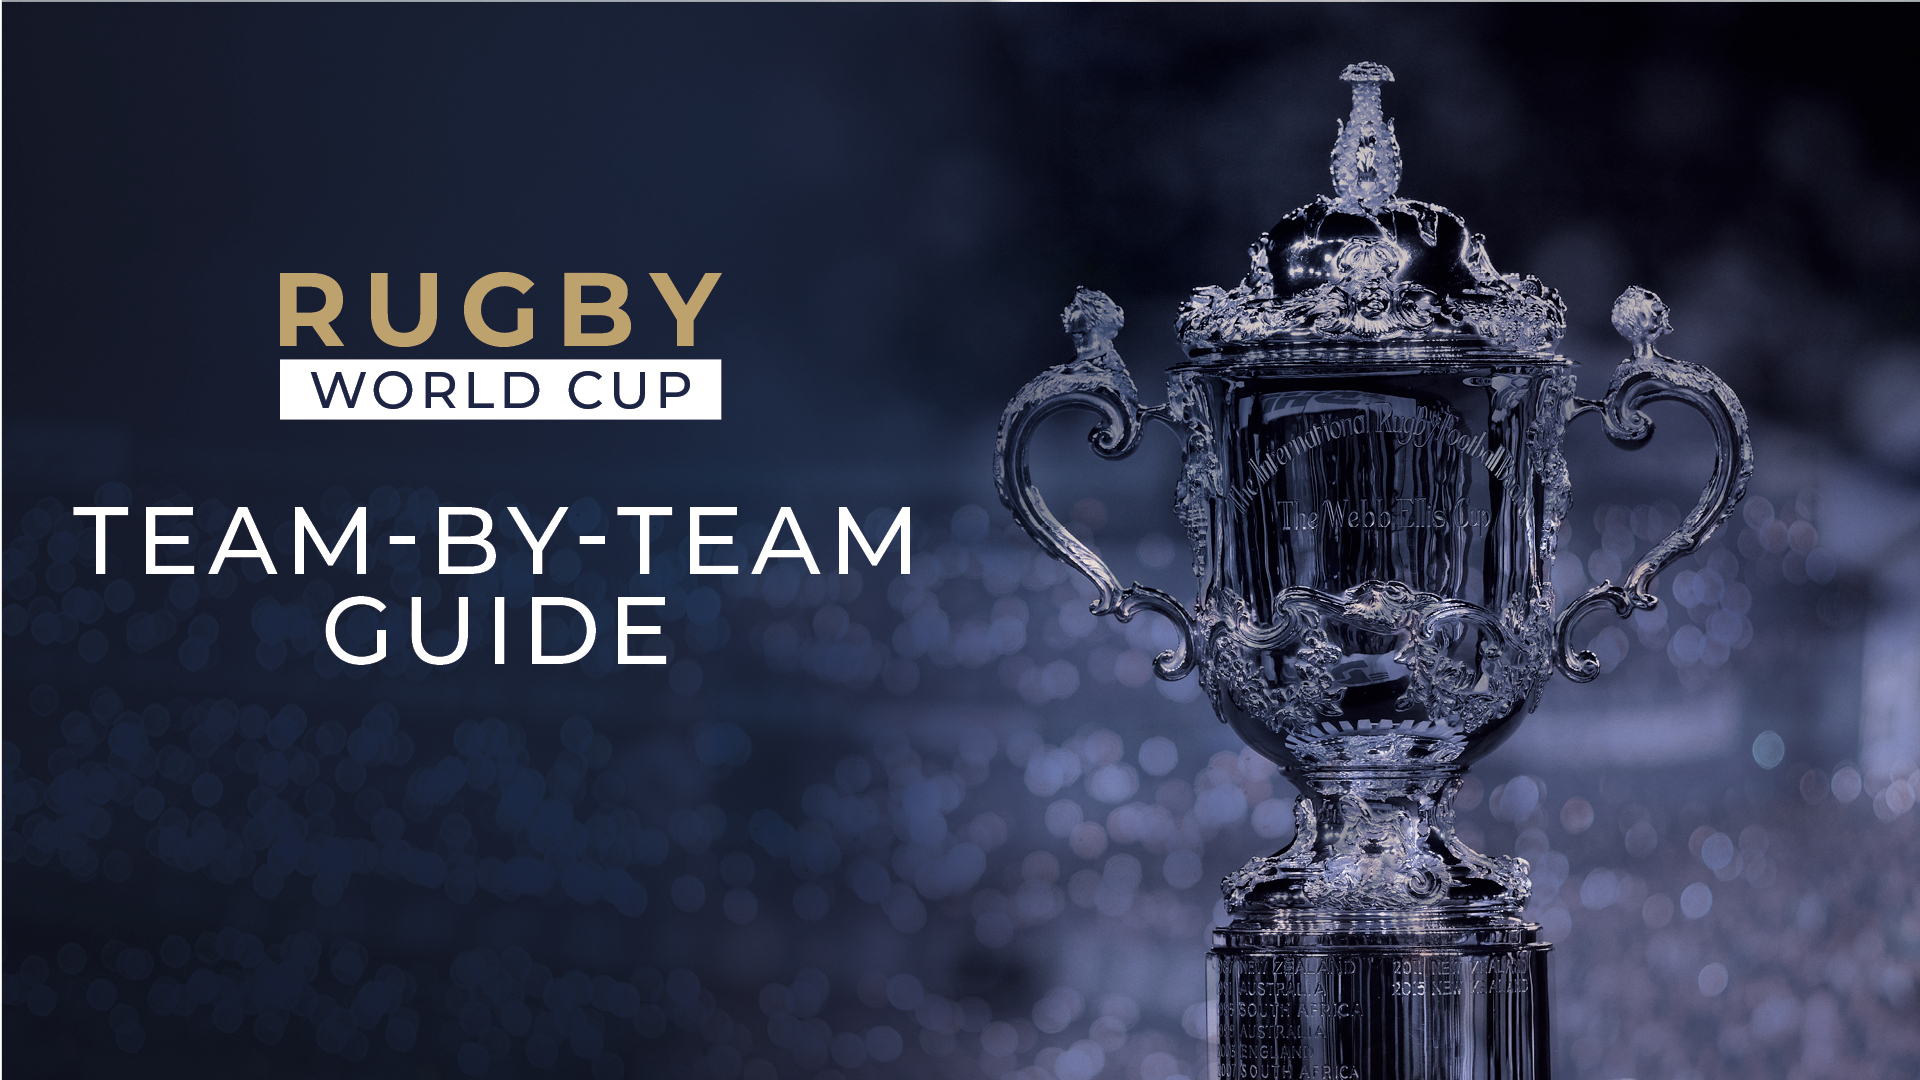 Rugby World Cup 2023 Team-by-team guide and star players to watch ahead of the tournament in France